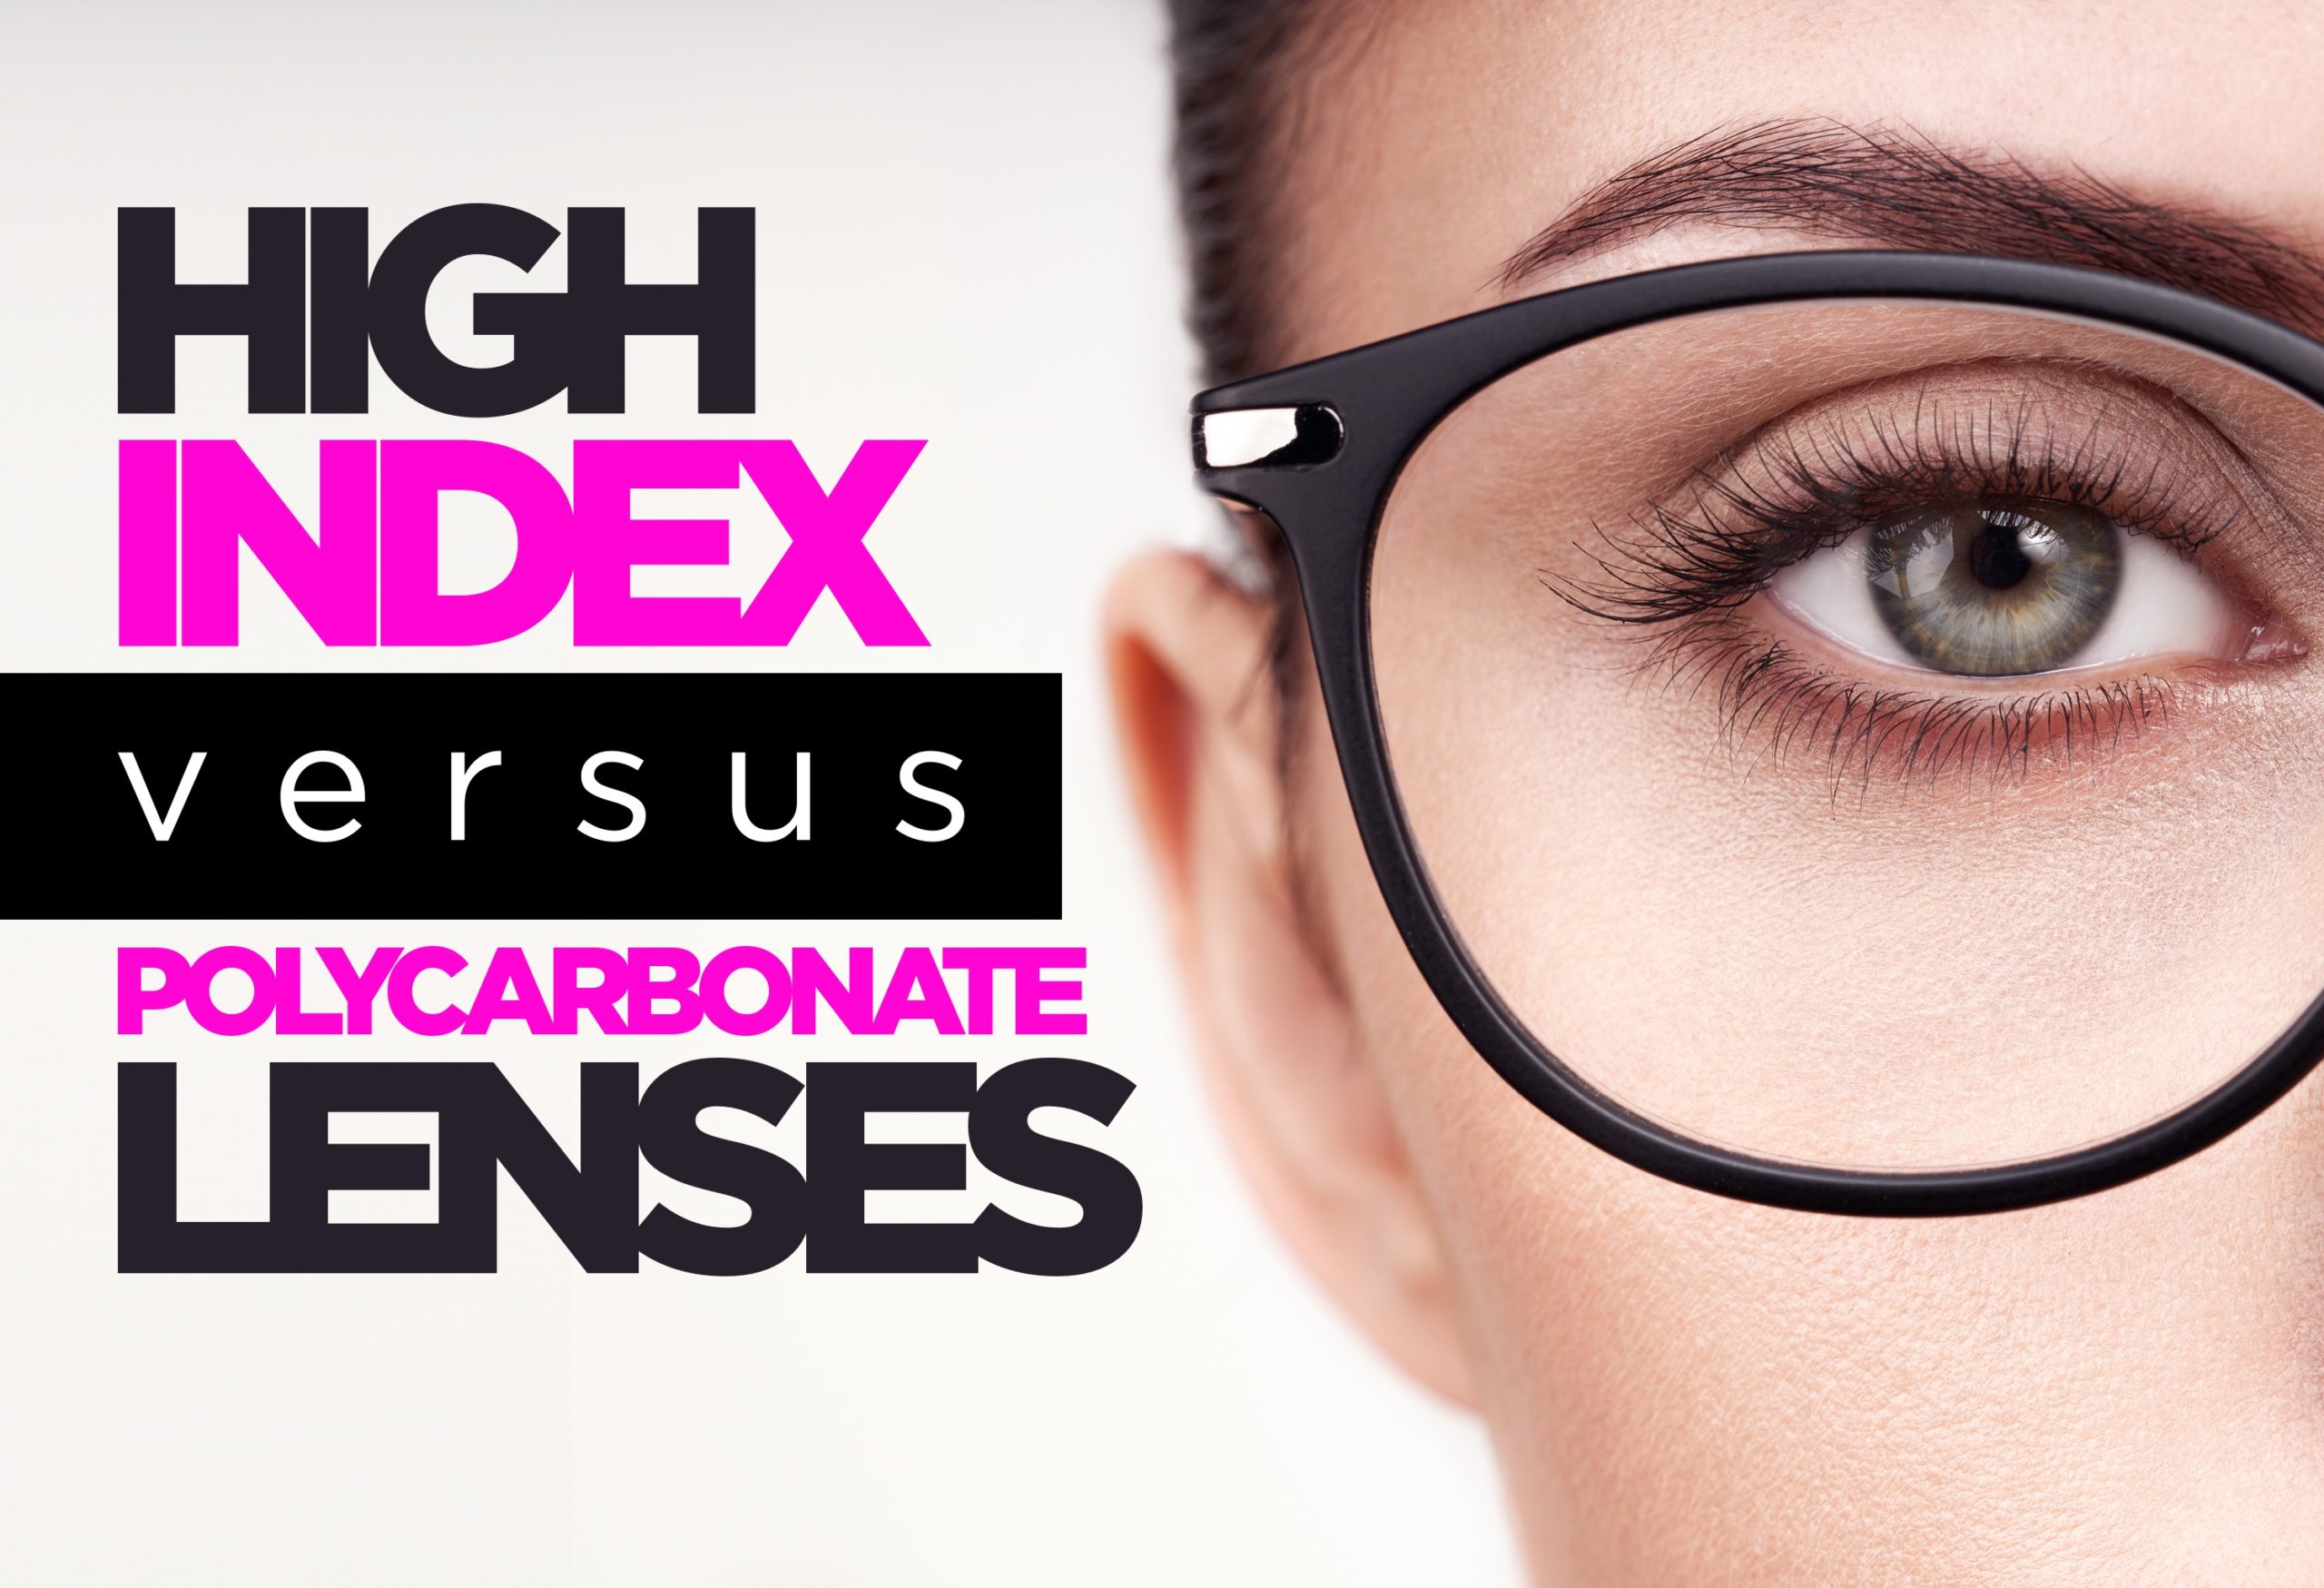 What Is The Difference Between Polycarbonate And Acrylic Lenses?